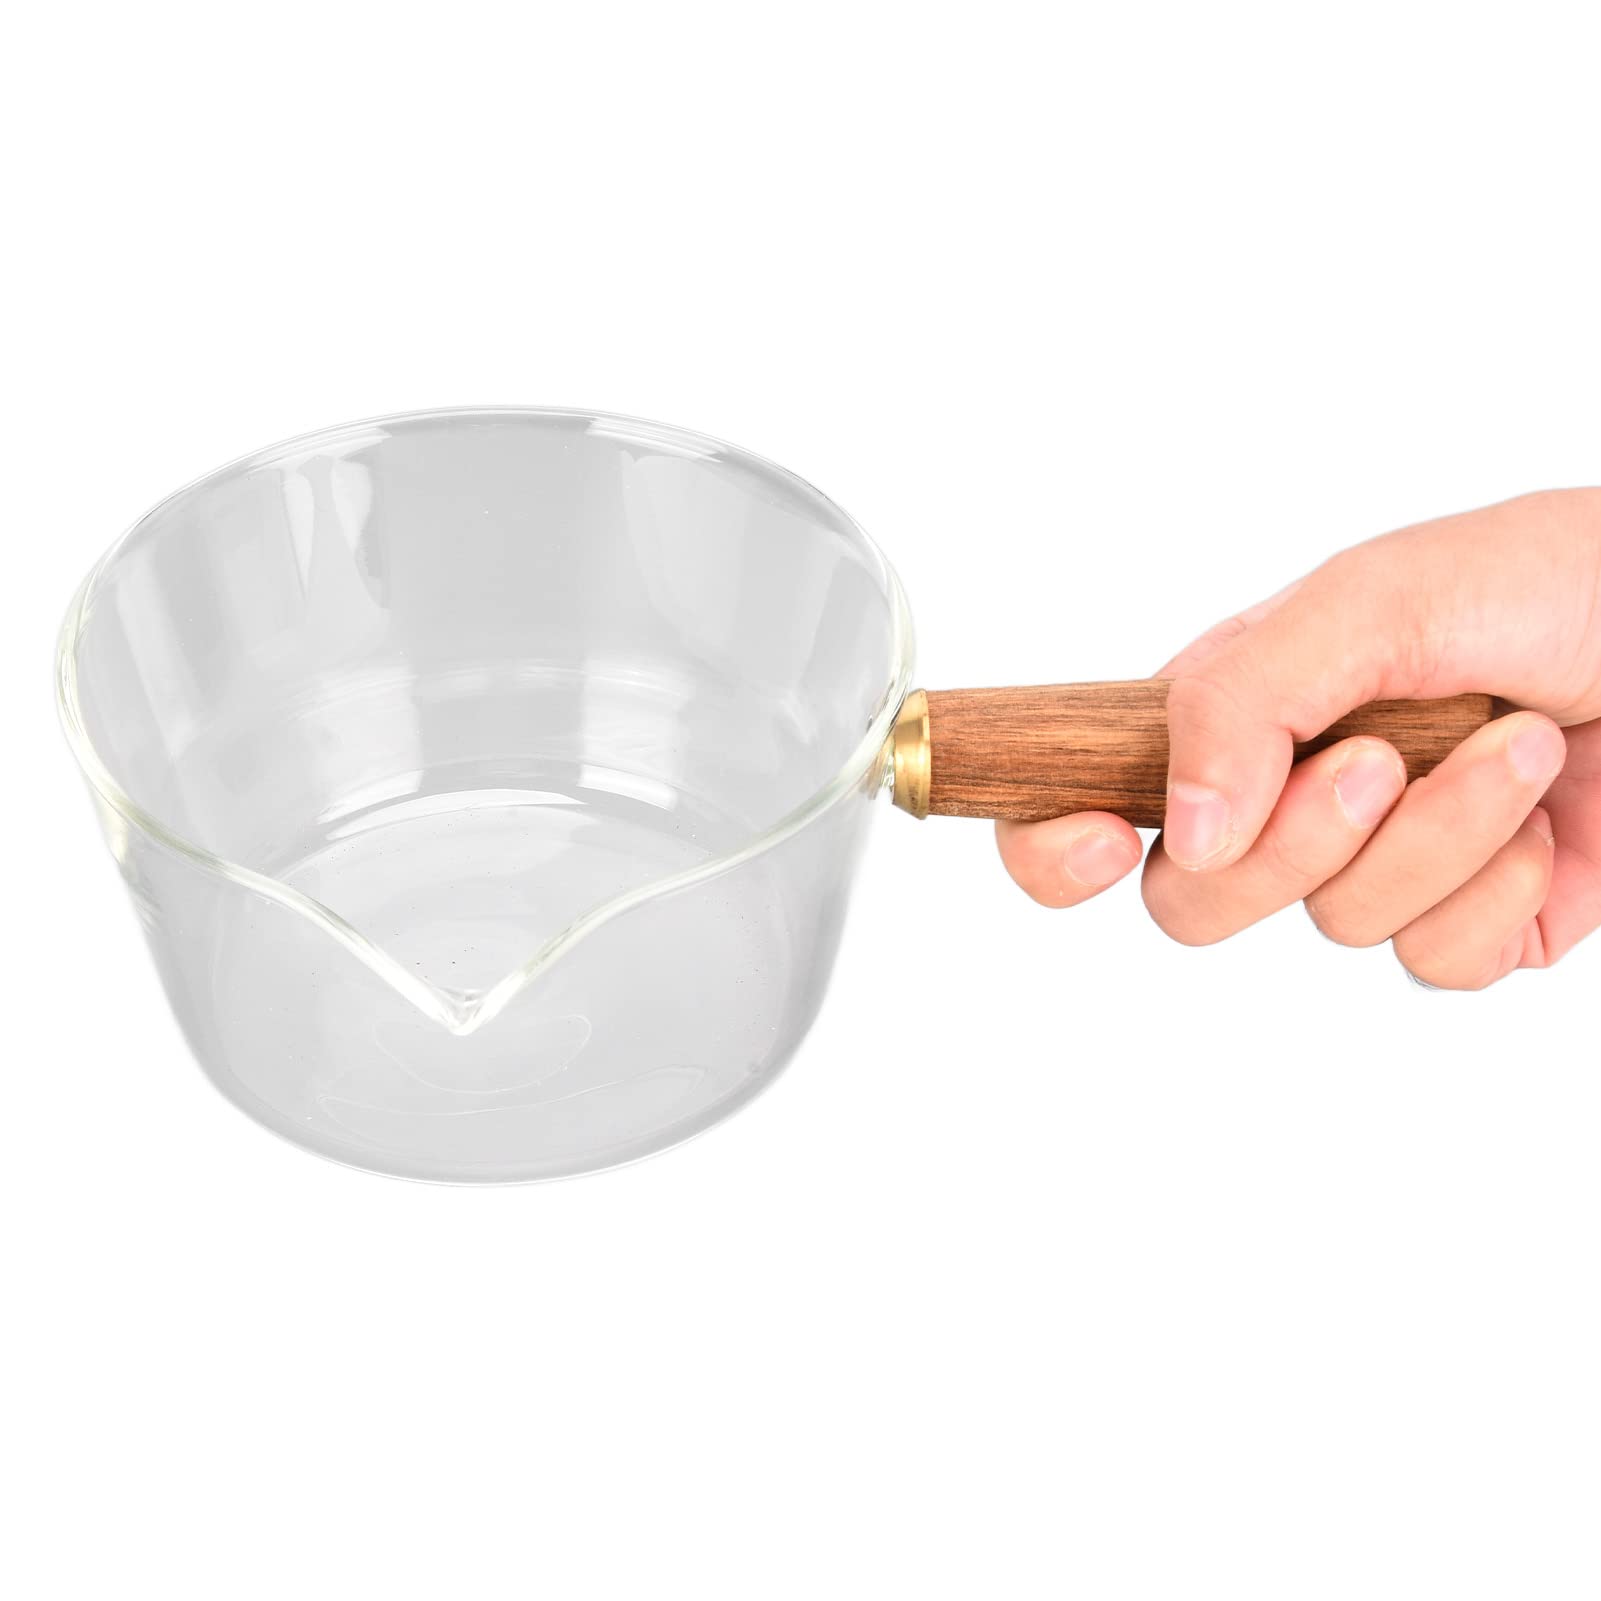 Noodle Pot Clear Glass Pot Milk Pan With Wooden Handle Borosilicate Glass Nonstick Saucepan Glass Measuring Cups Frothing Pitcher for Kitchen Restaurant Glass Pan(400ml)